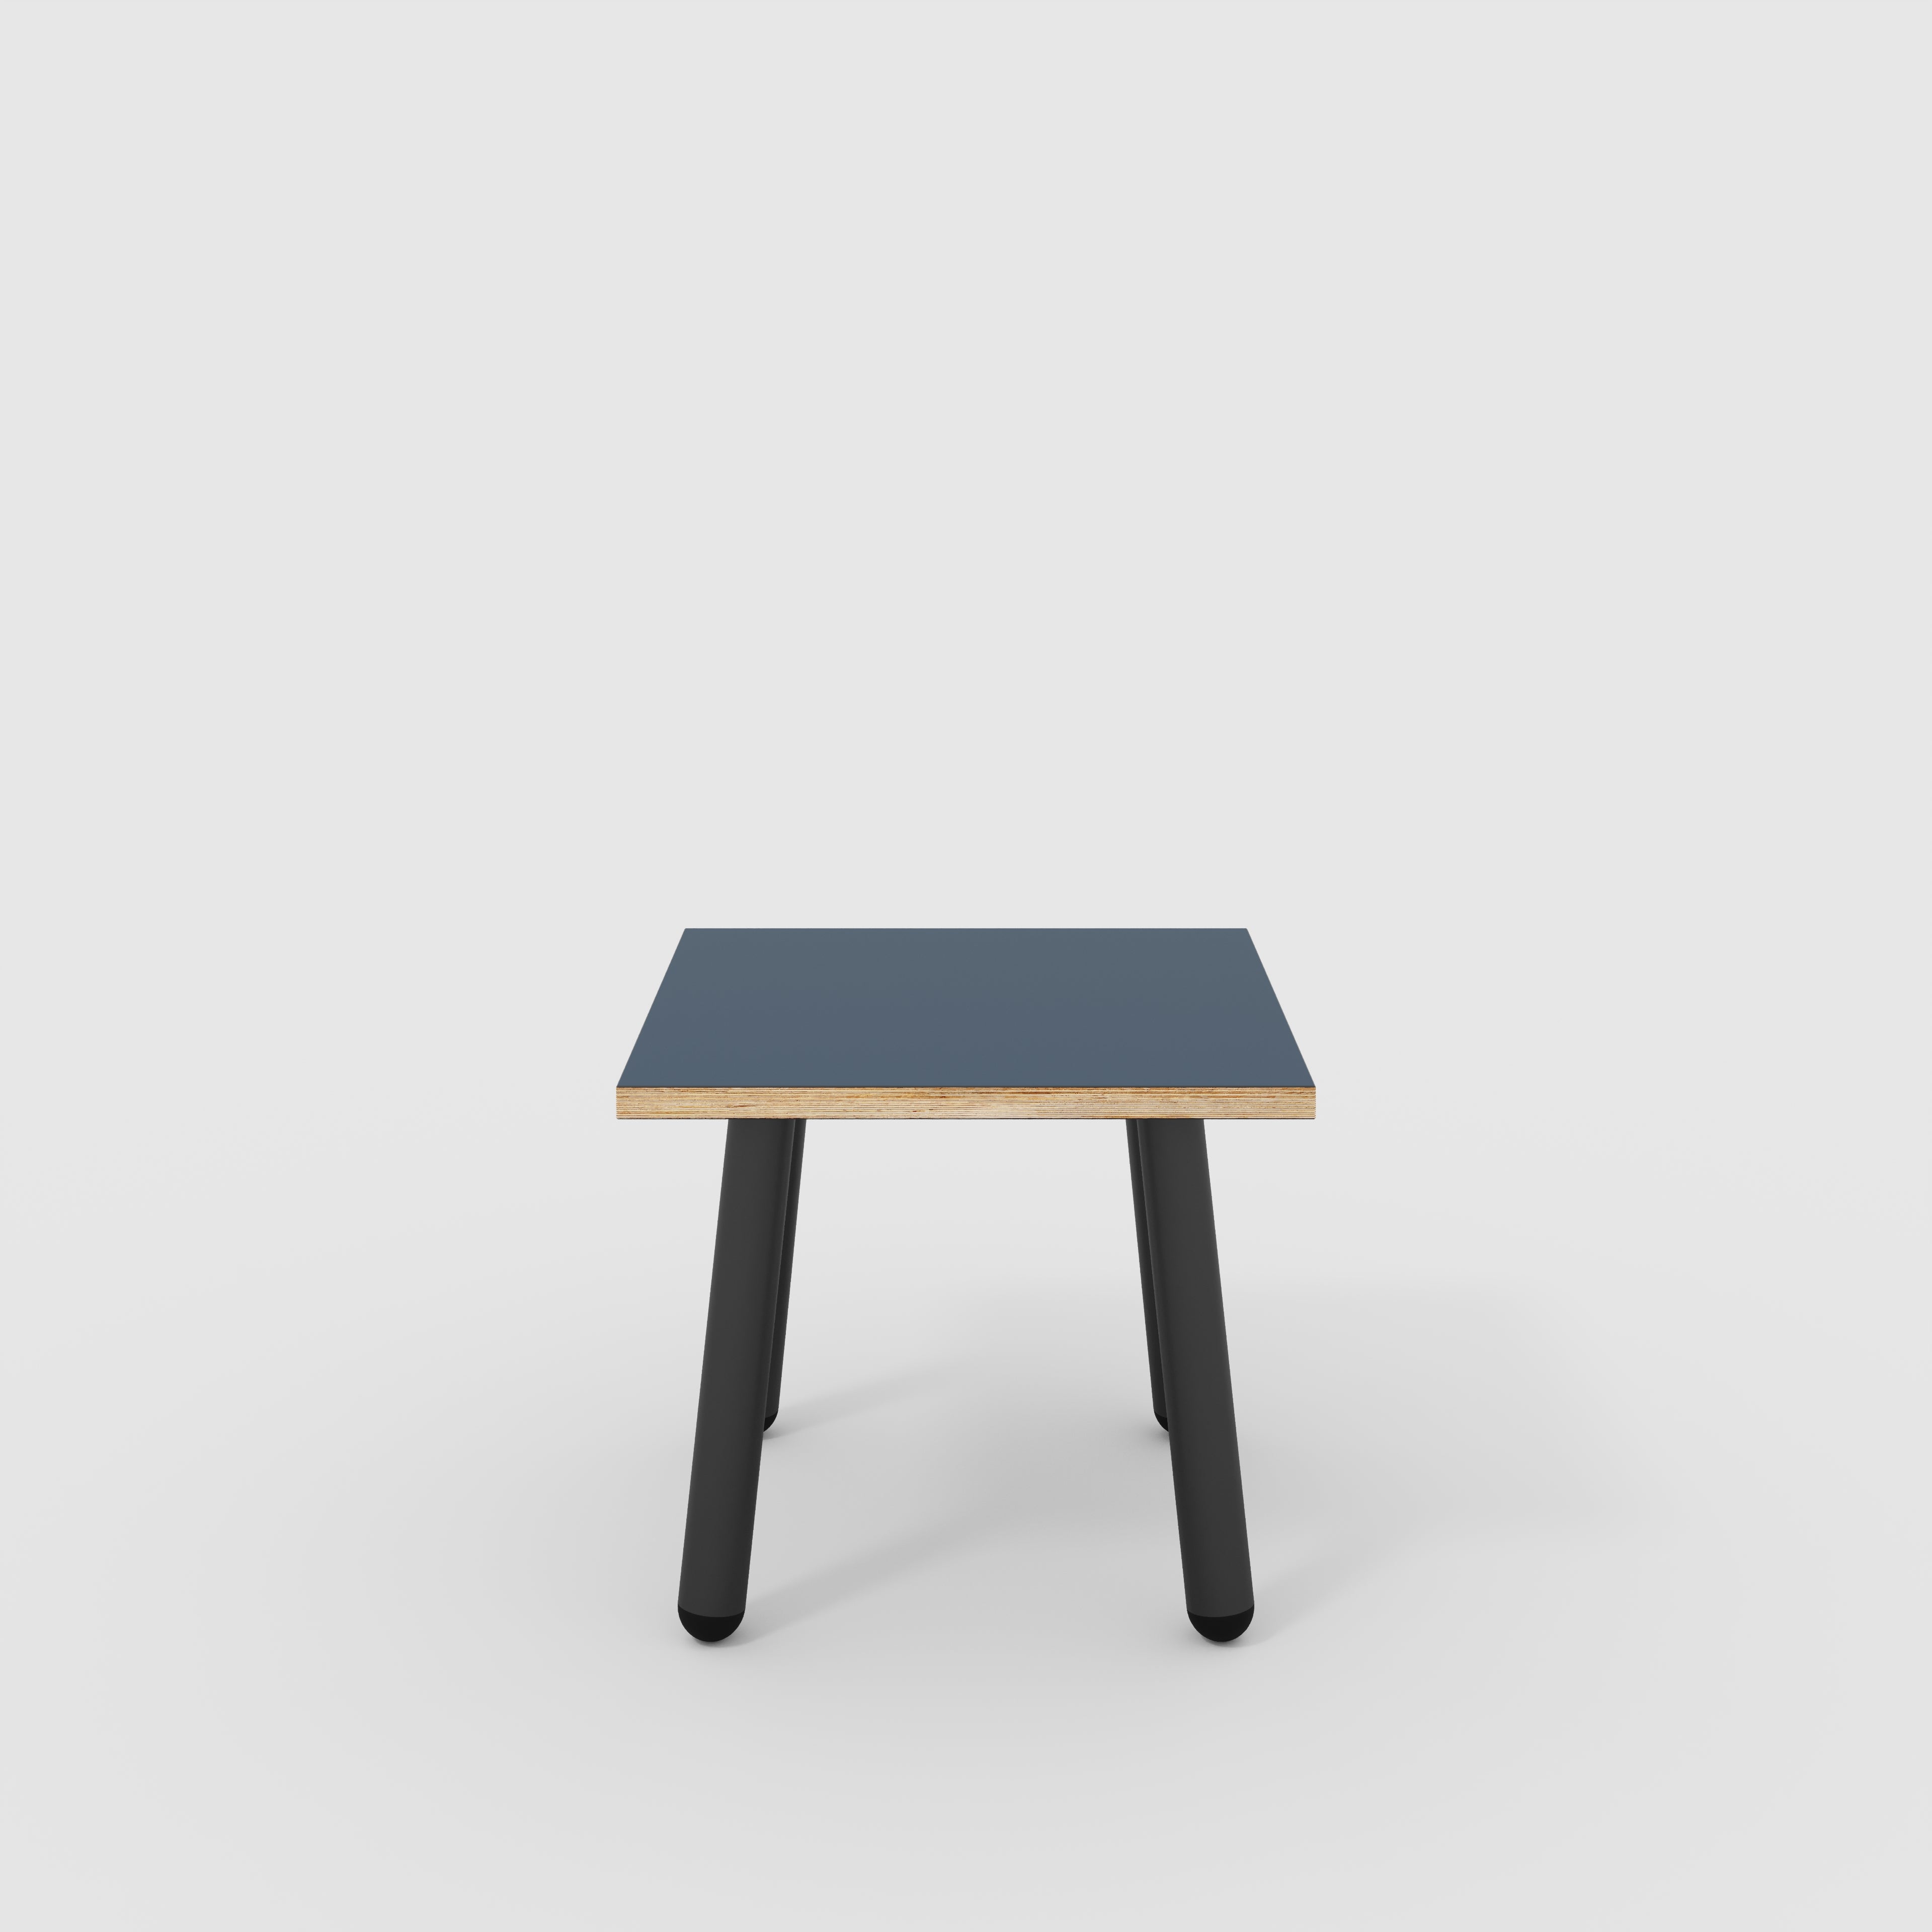 Side Table with Round Single Pin Legs - Formica Night Sea Blue - 500(w) x 500(d) x 425(h)